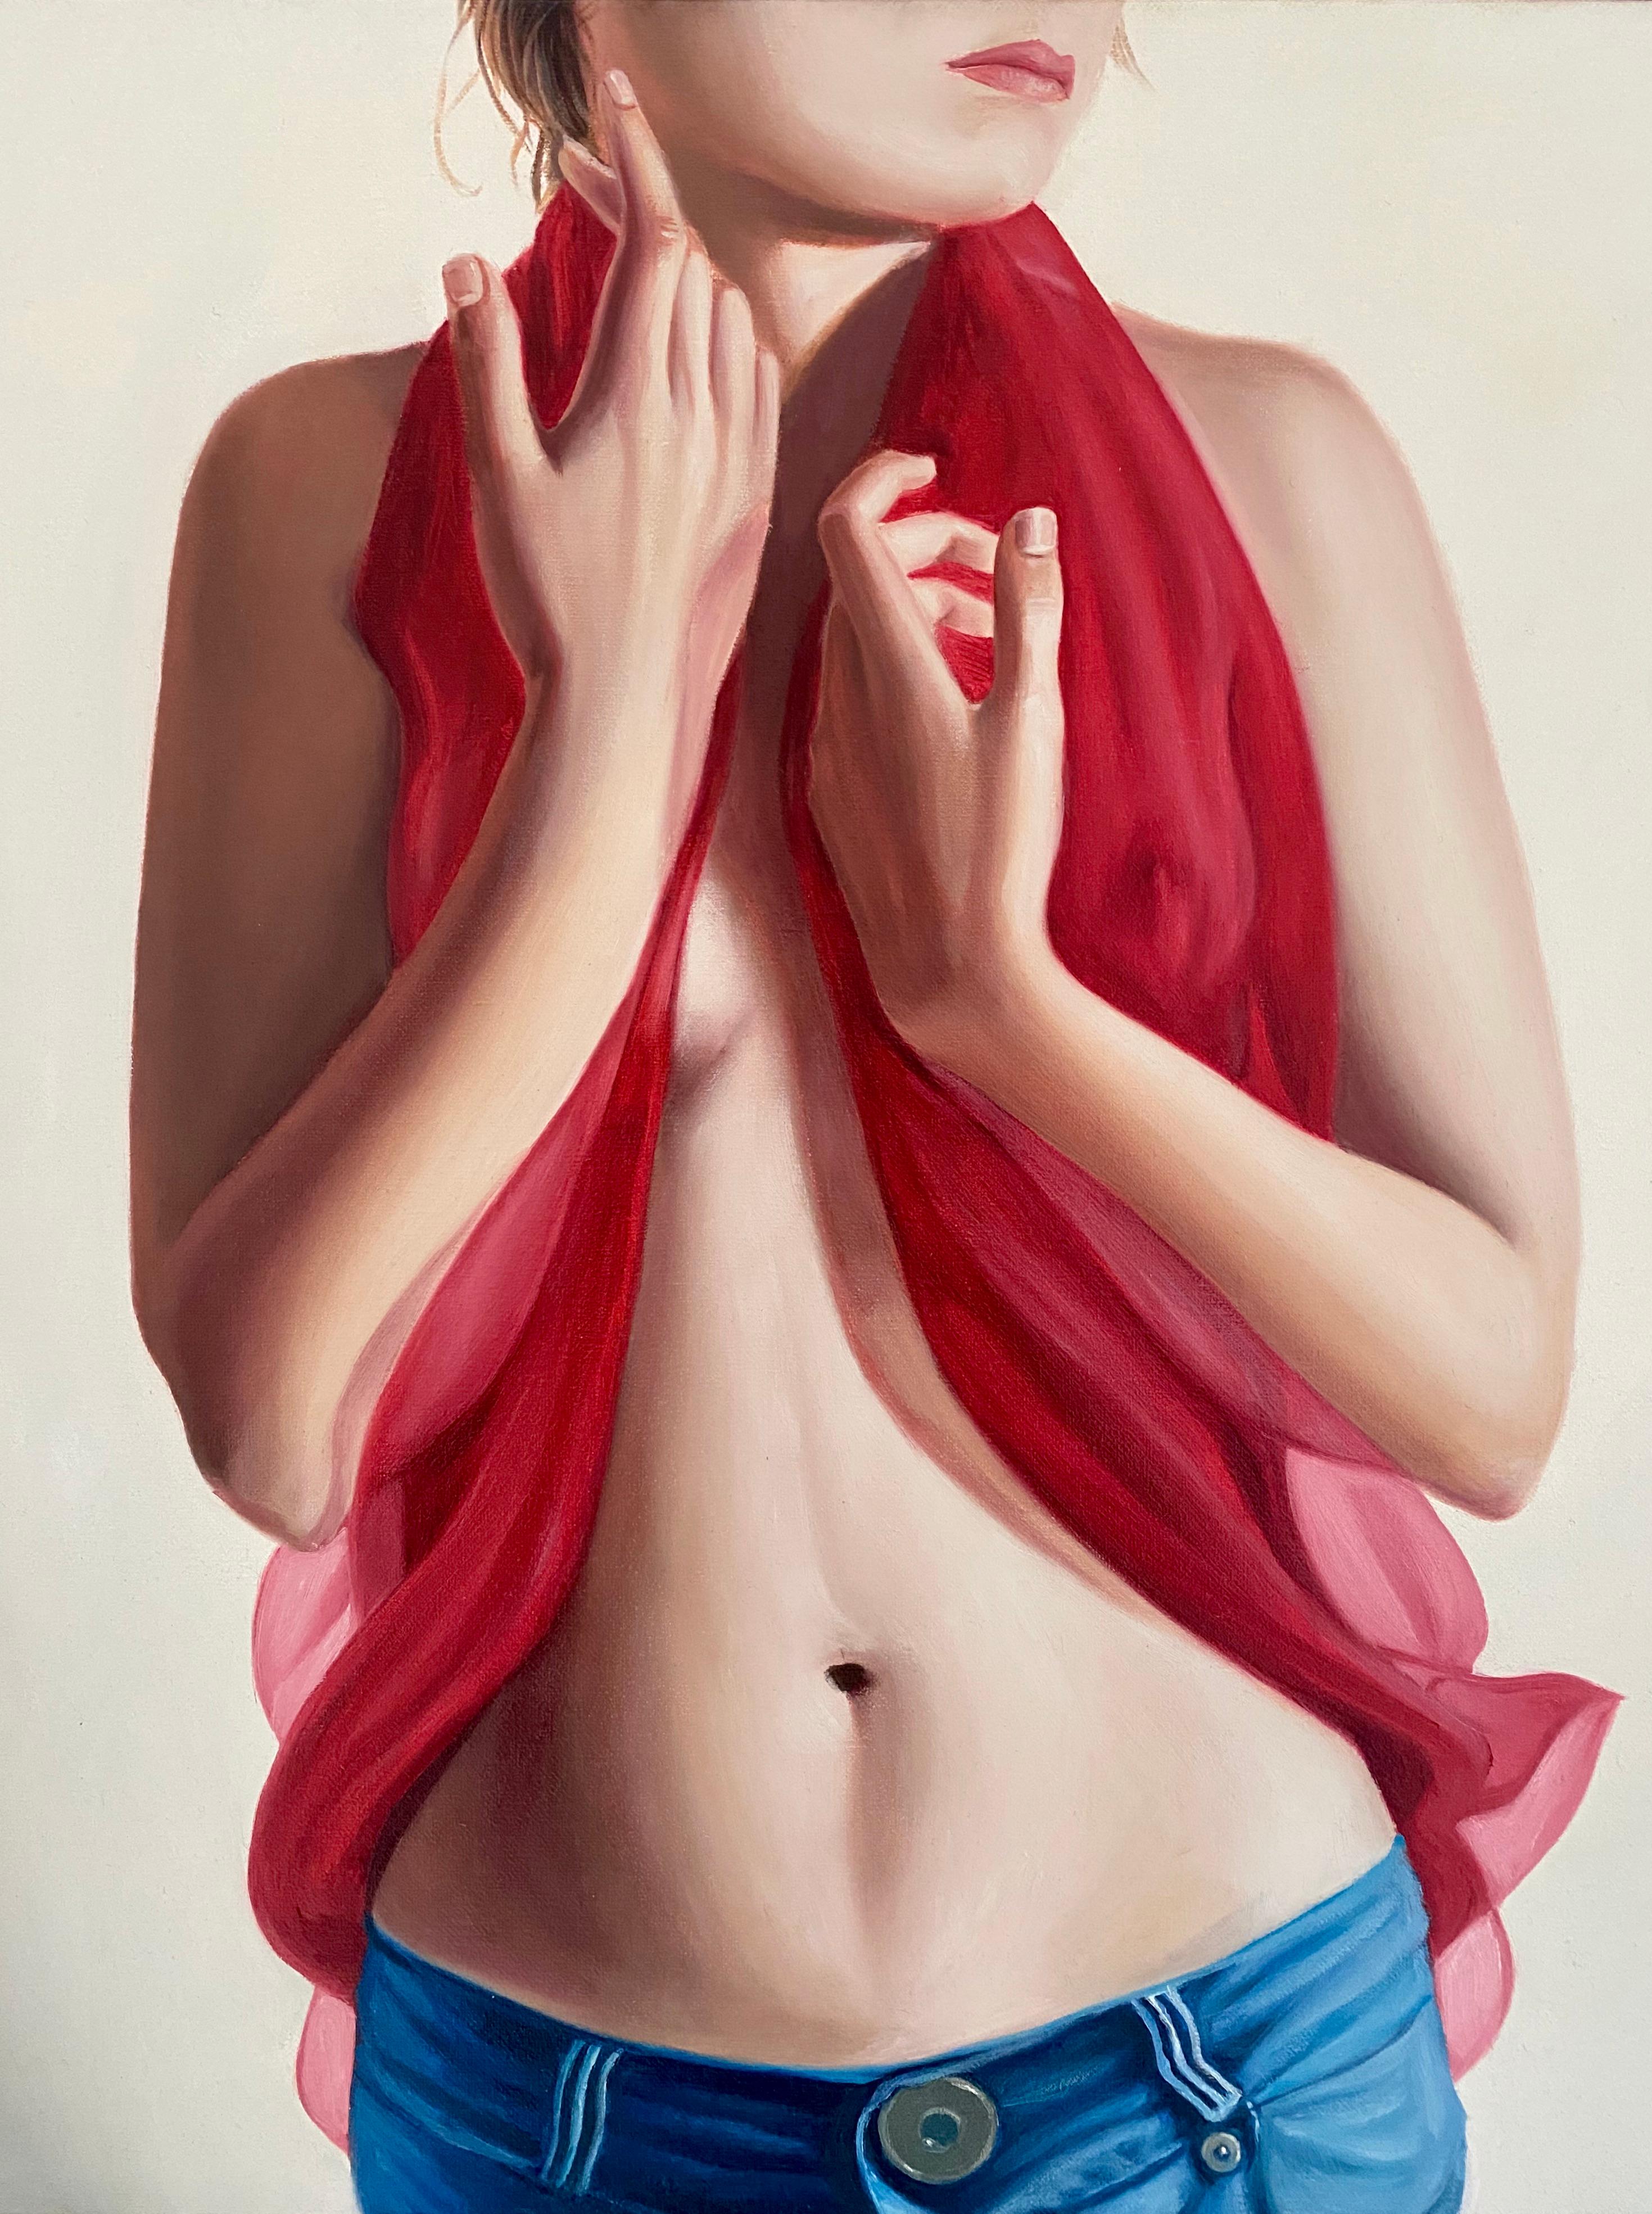 She VII. 2006, oil canvas, photorealistic, figurative, woman, hyperrealism, skin - Photorealist Painting by Angel Peychinov